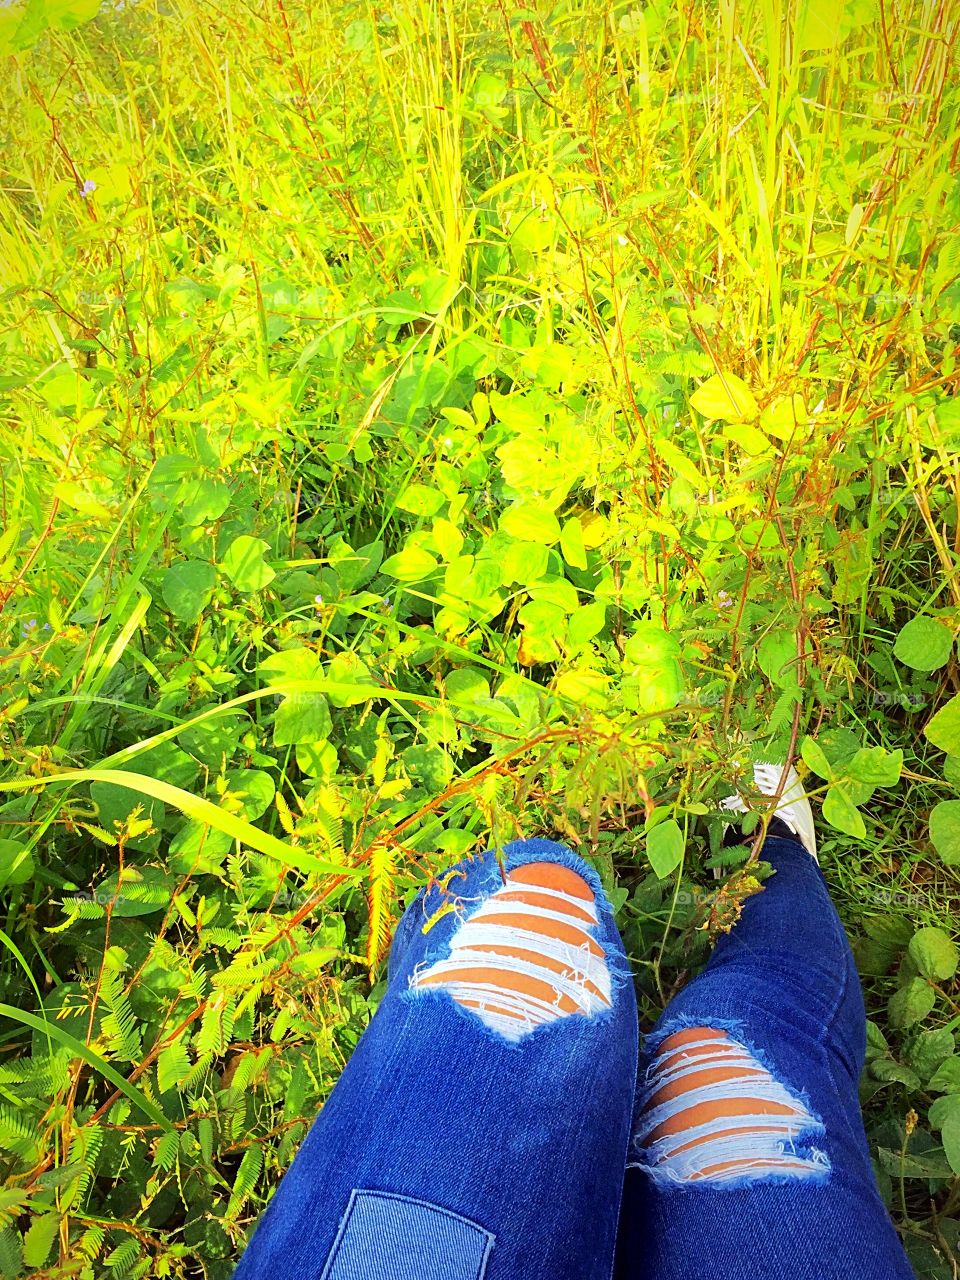 The grass and my ripped jeans